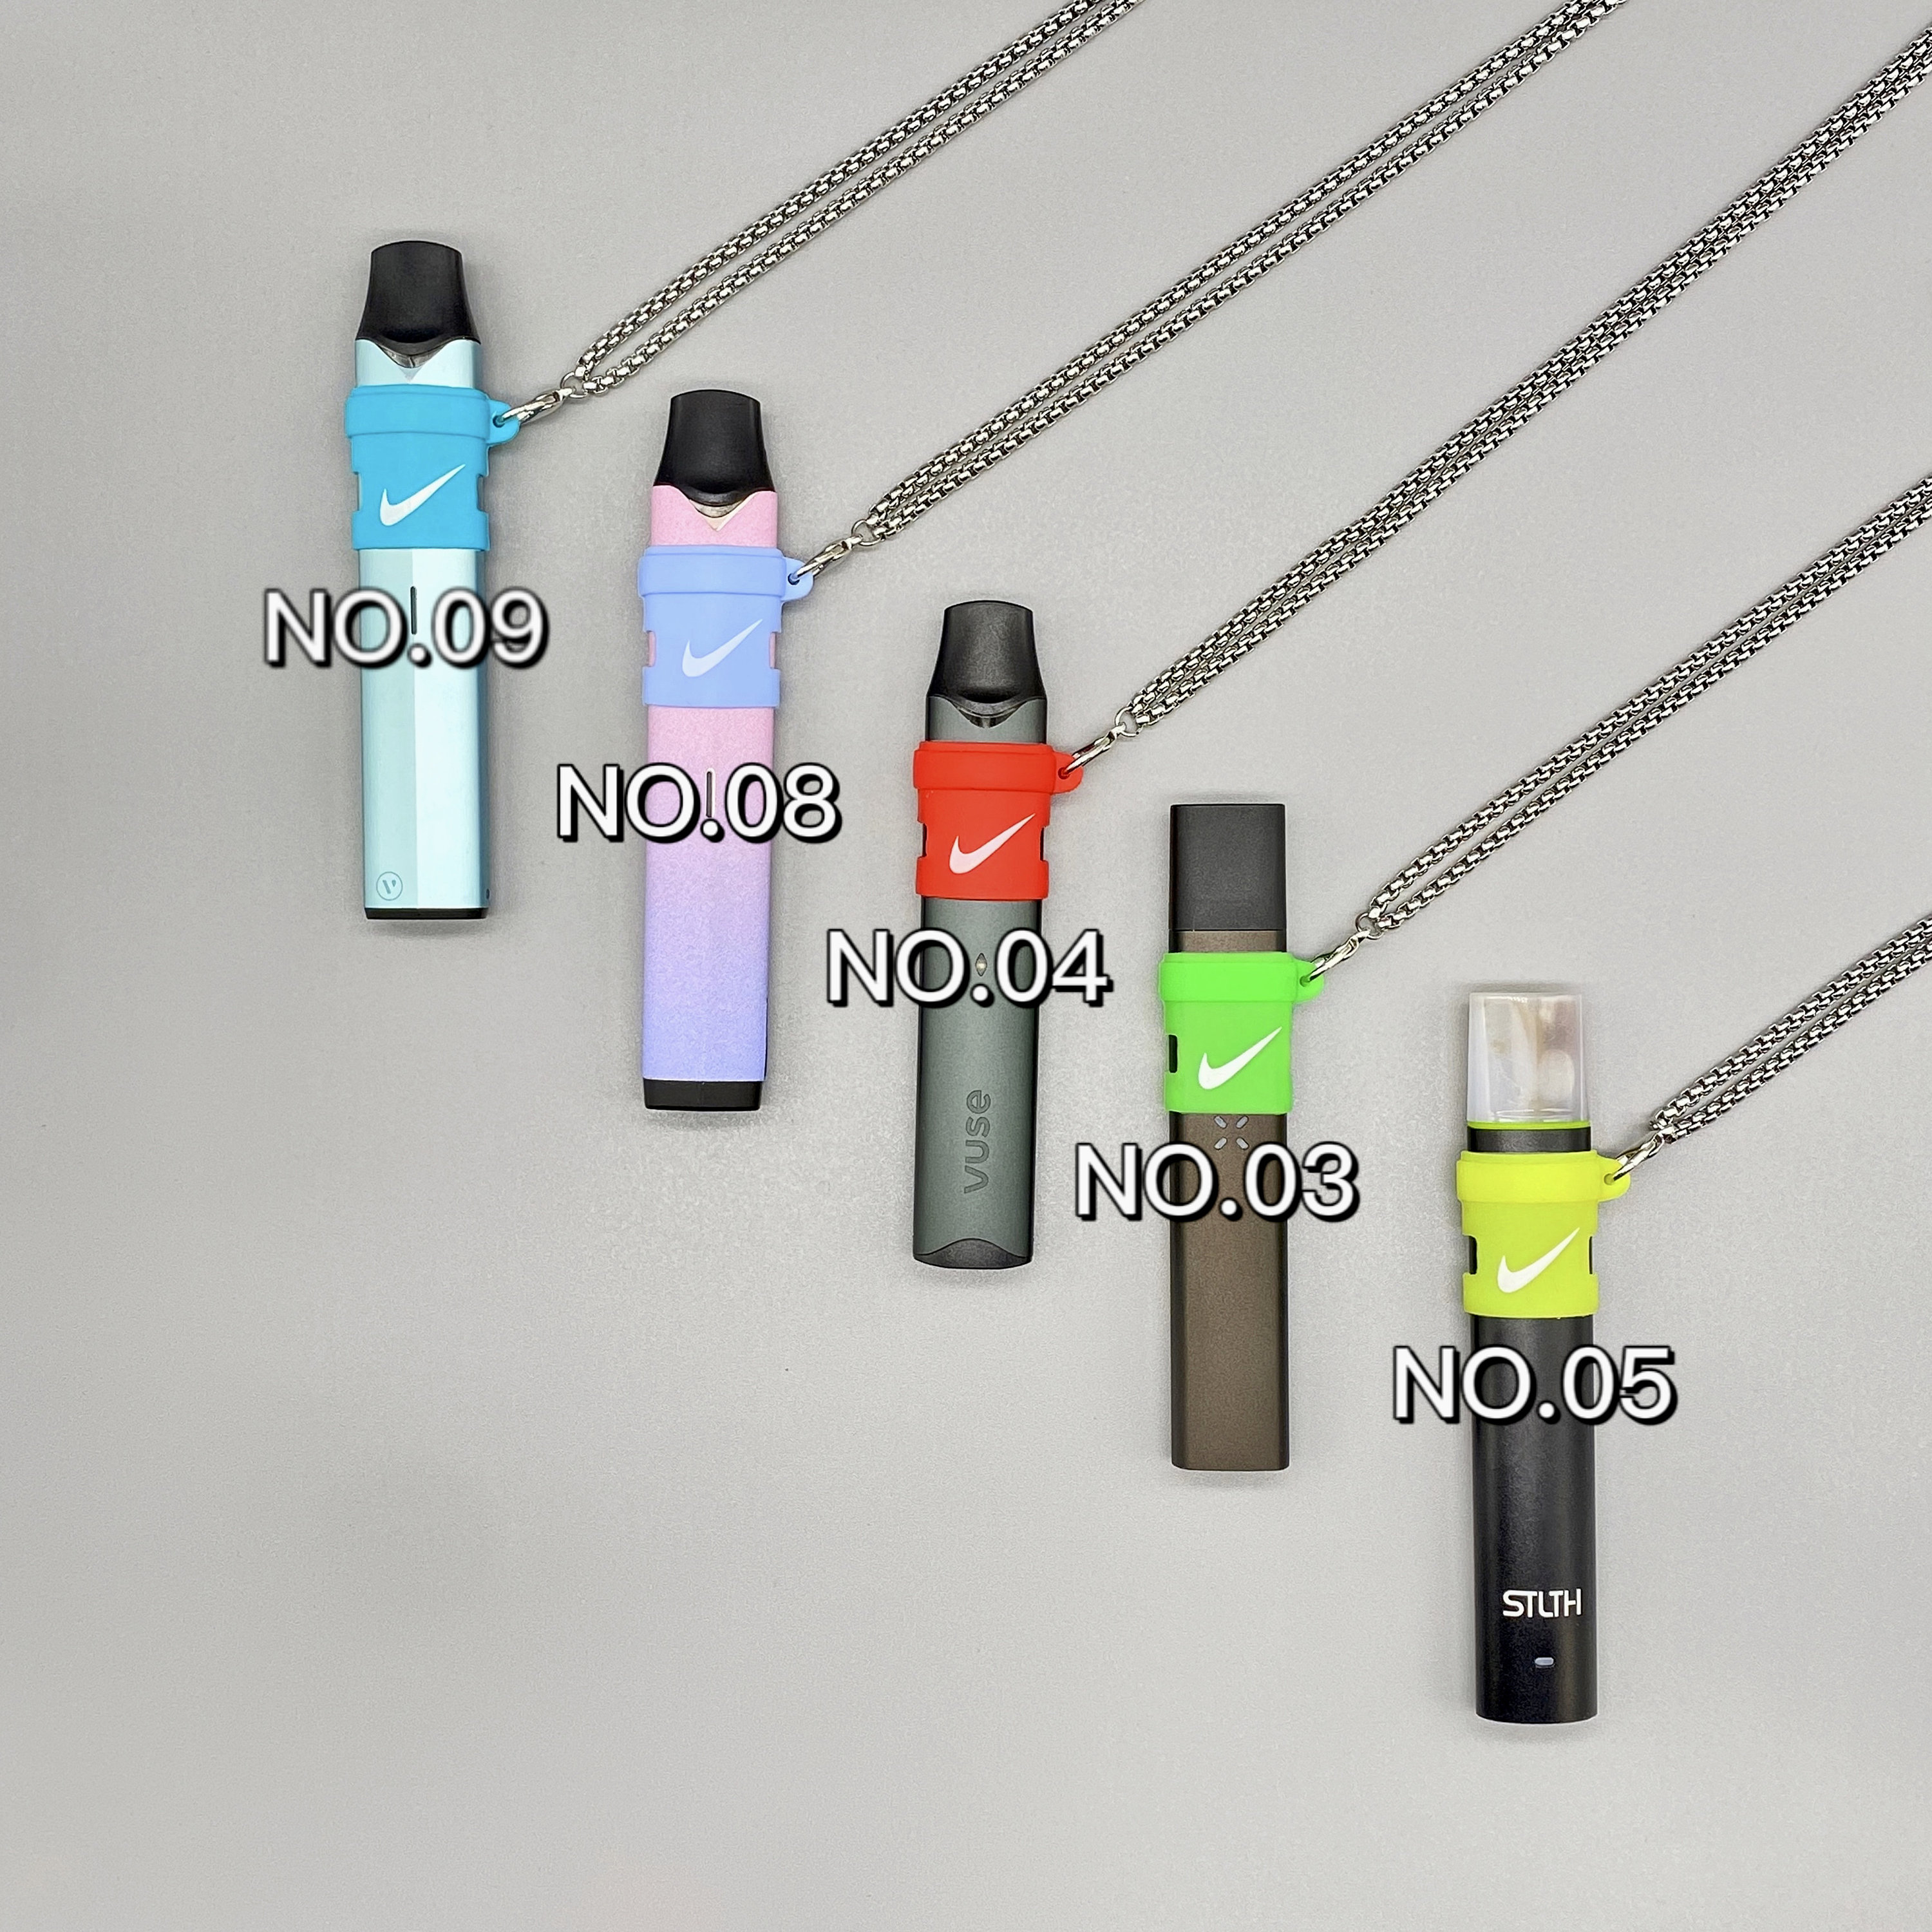 GetUSCart- Original Skin Decal for PAX JUUL (Wrap Only, Device Is